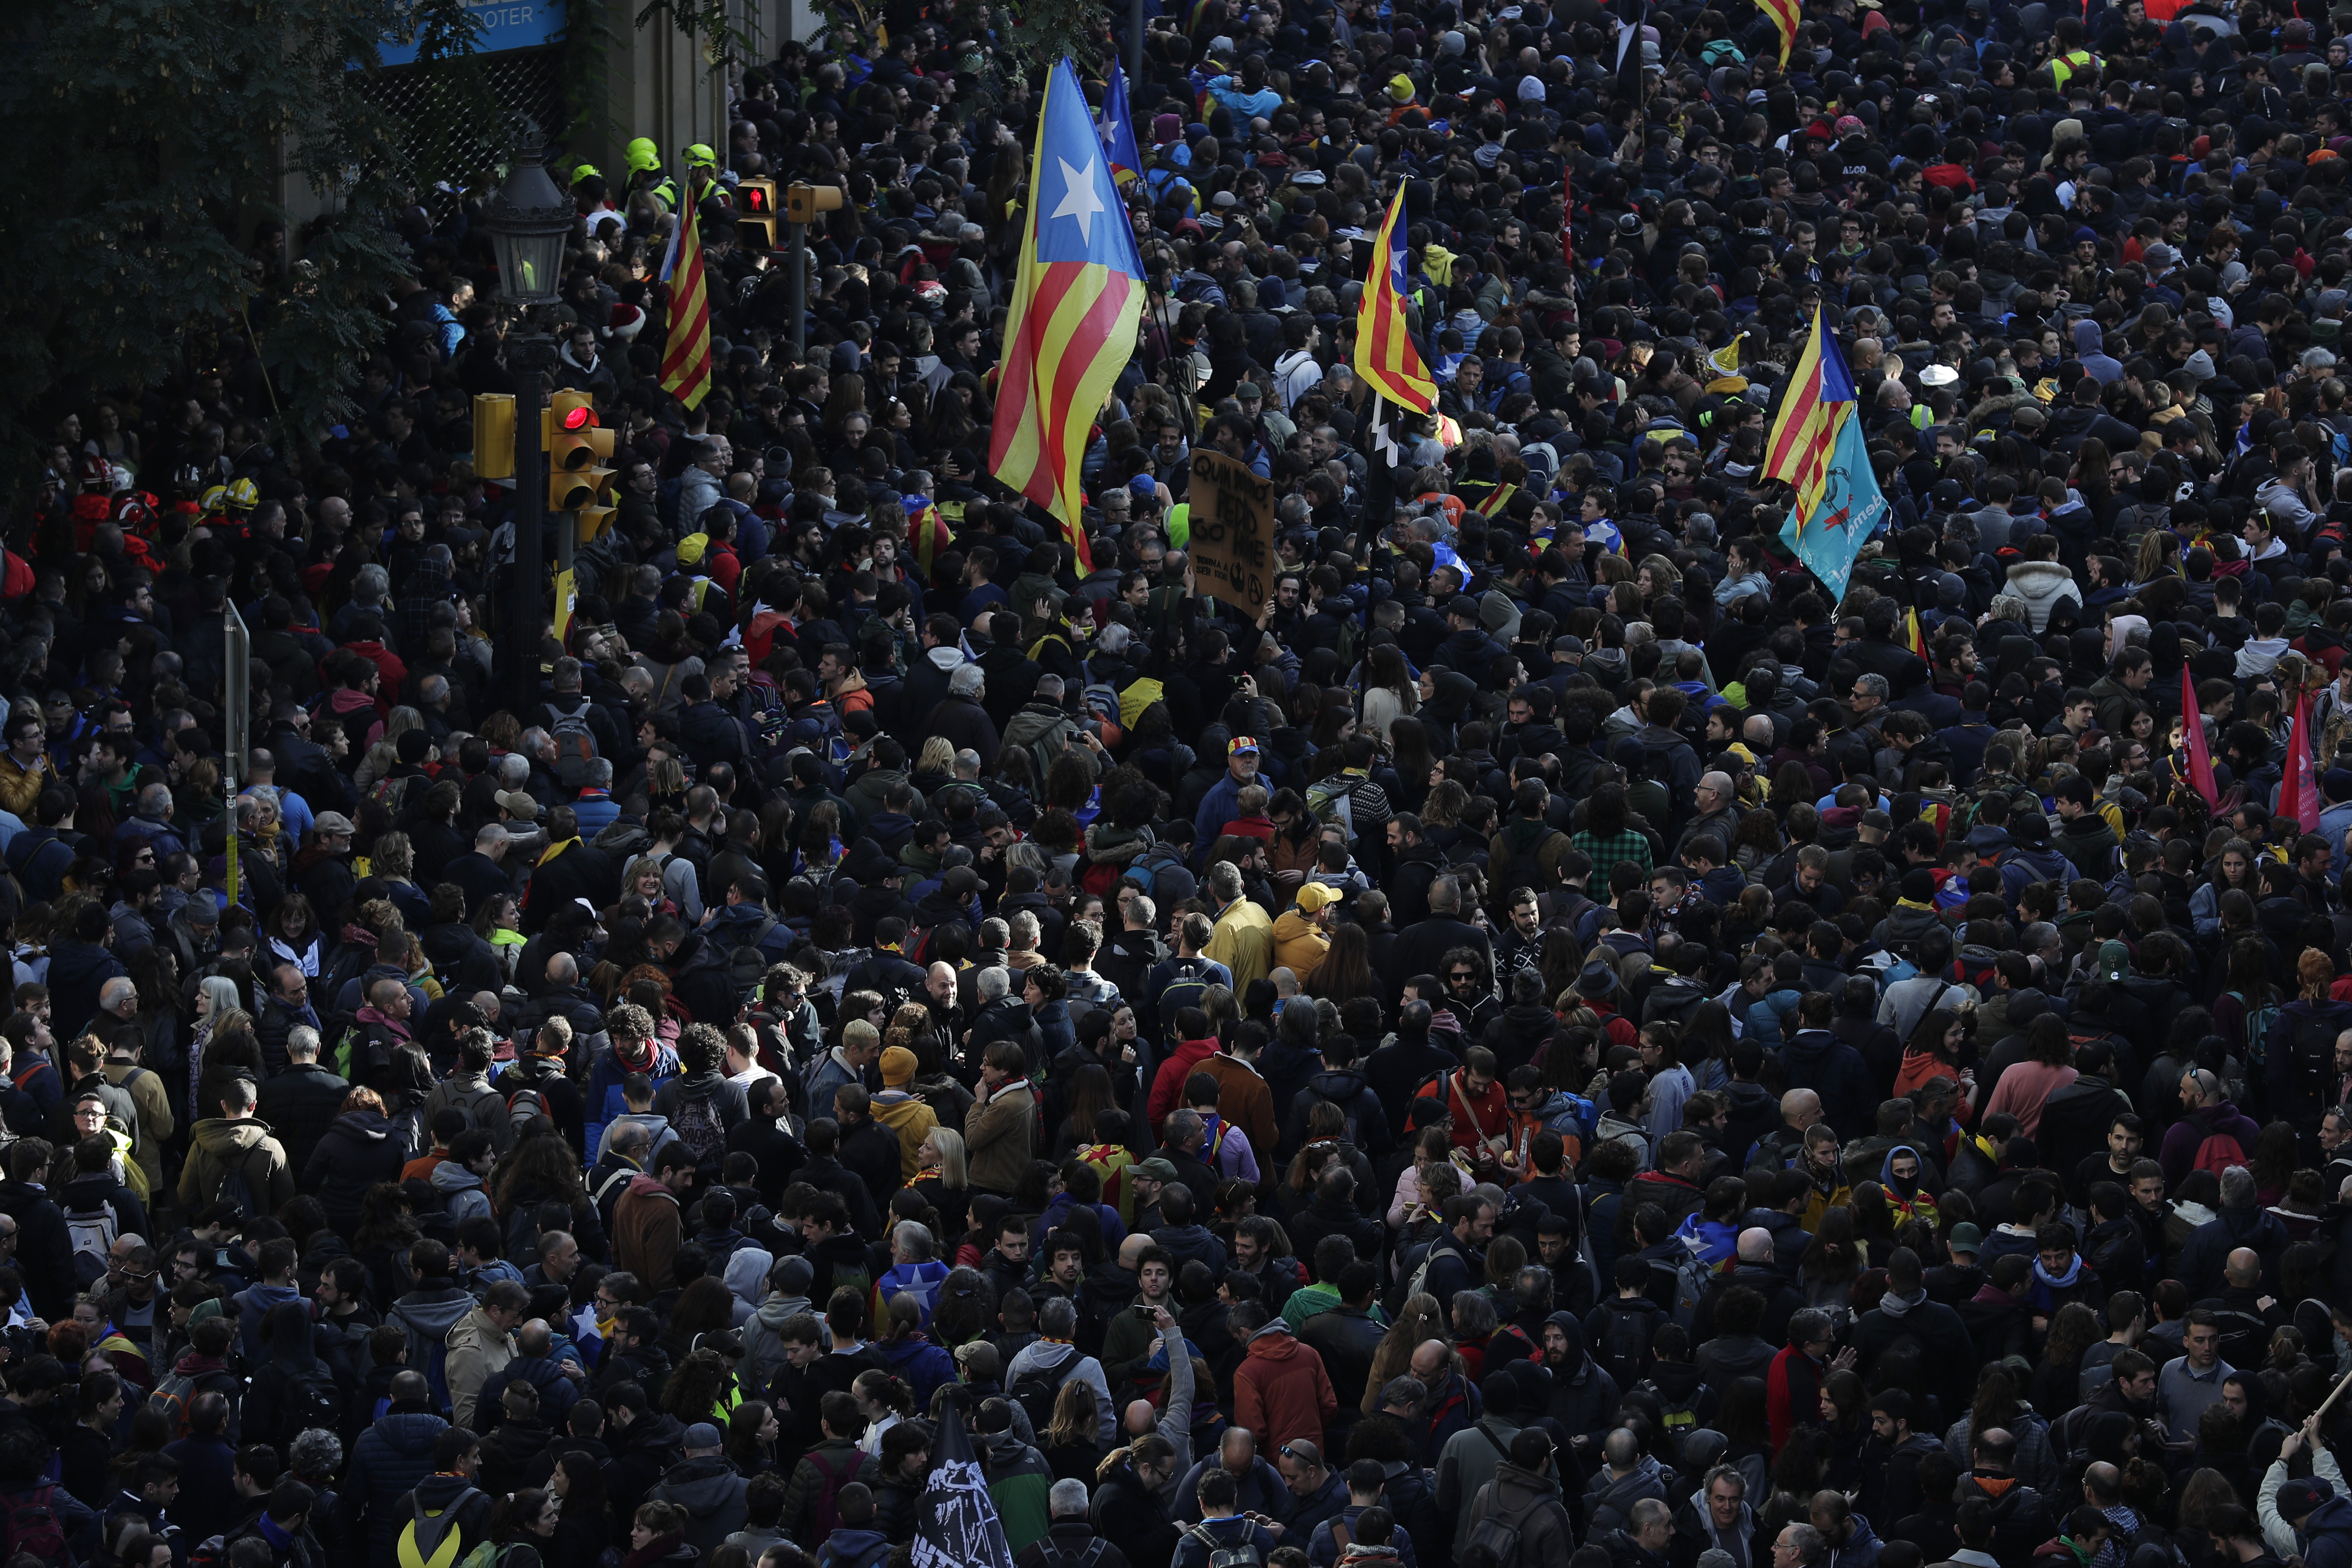 Pro-independence demonstrators protest against Spain's cabinet holding a meeting in Barcelona Spain, Friday Dec. 21, 2018. Scuffles have broken out between protesters trying to reach the venue of the cabinet meeting and police trying to stop them on Friday in central Barcelona after pro-independence organizations called for peaceful demonstrations against the meeting across the city. (AP Photo/Manu Fernandez)